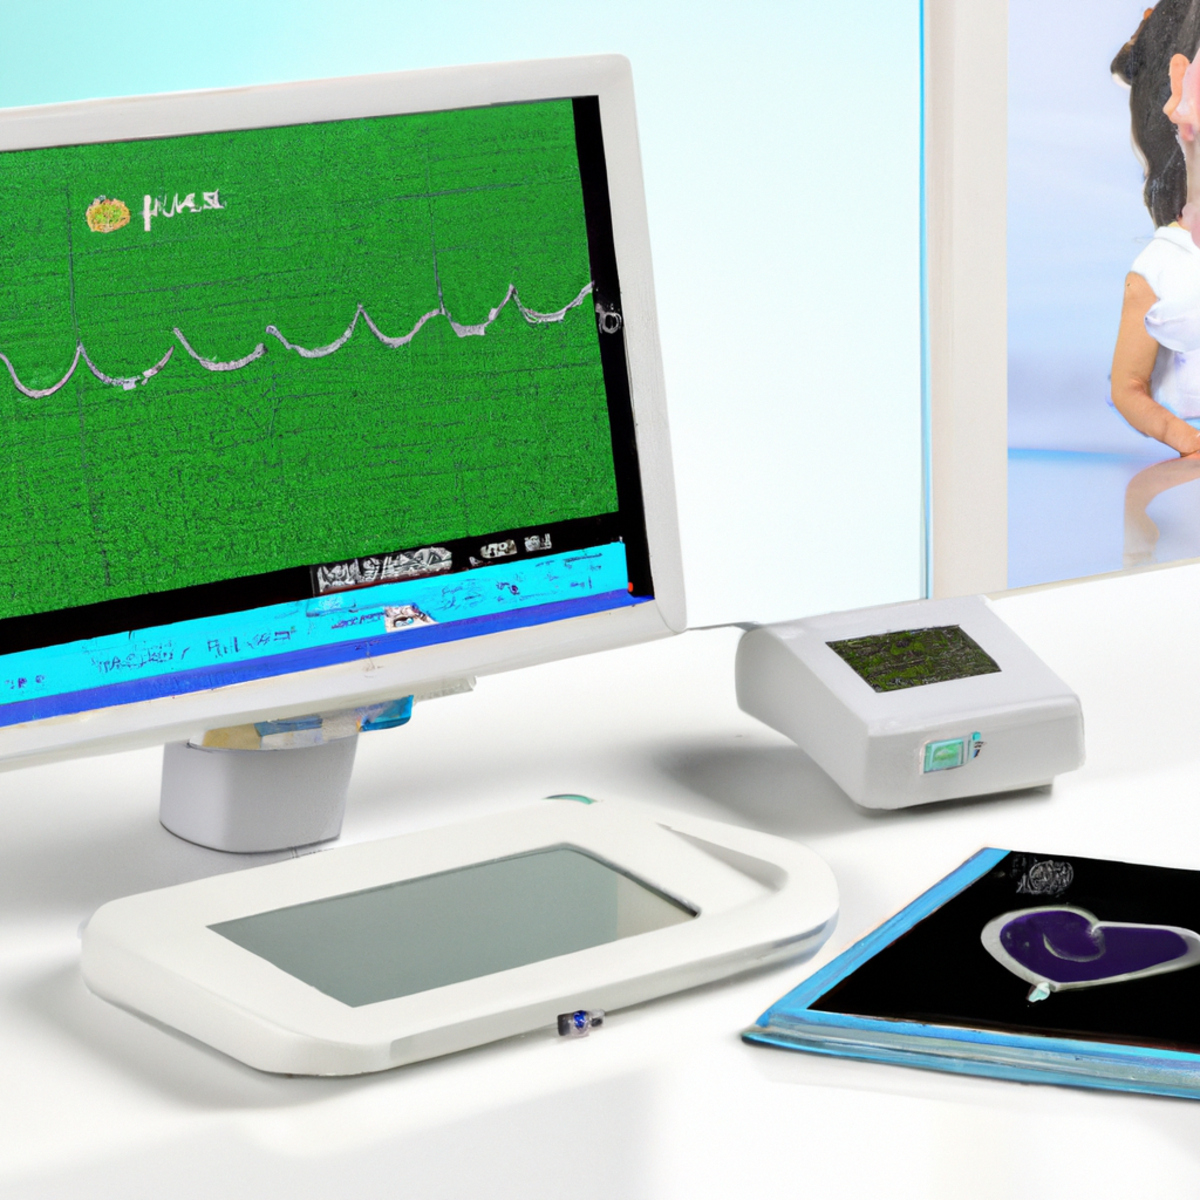 State-of-the-art ECG machine on white countertop displays vibrant heart rhythm graph, with stethoscope, records, and pen nearby -Fabry Disease
